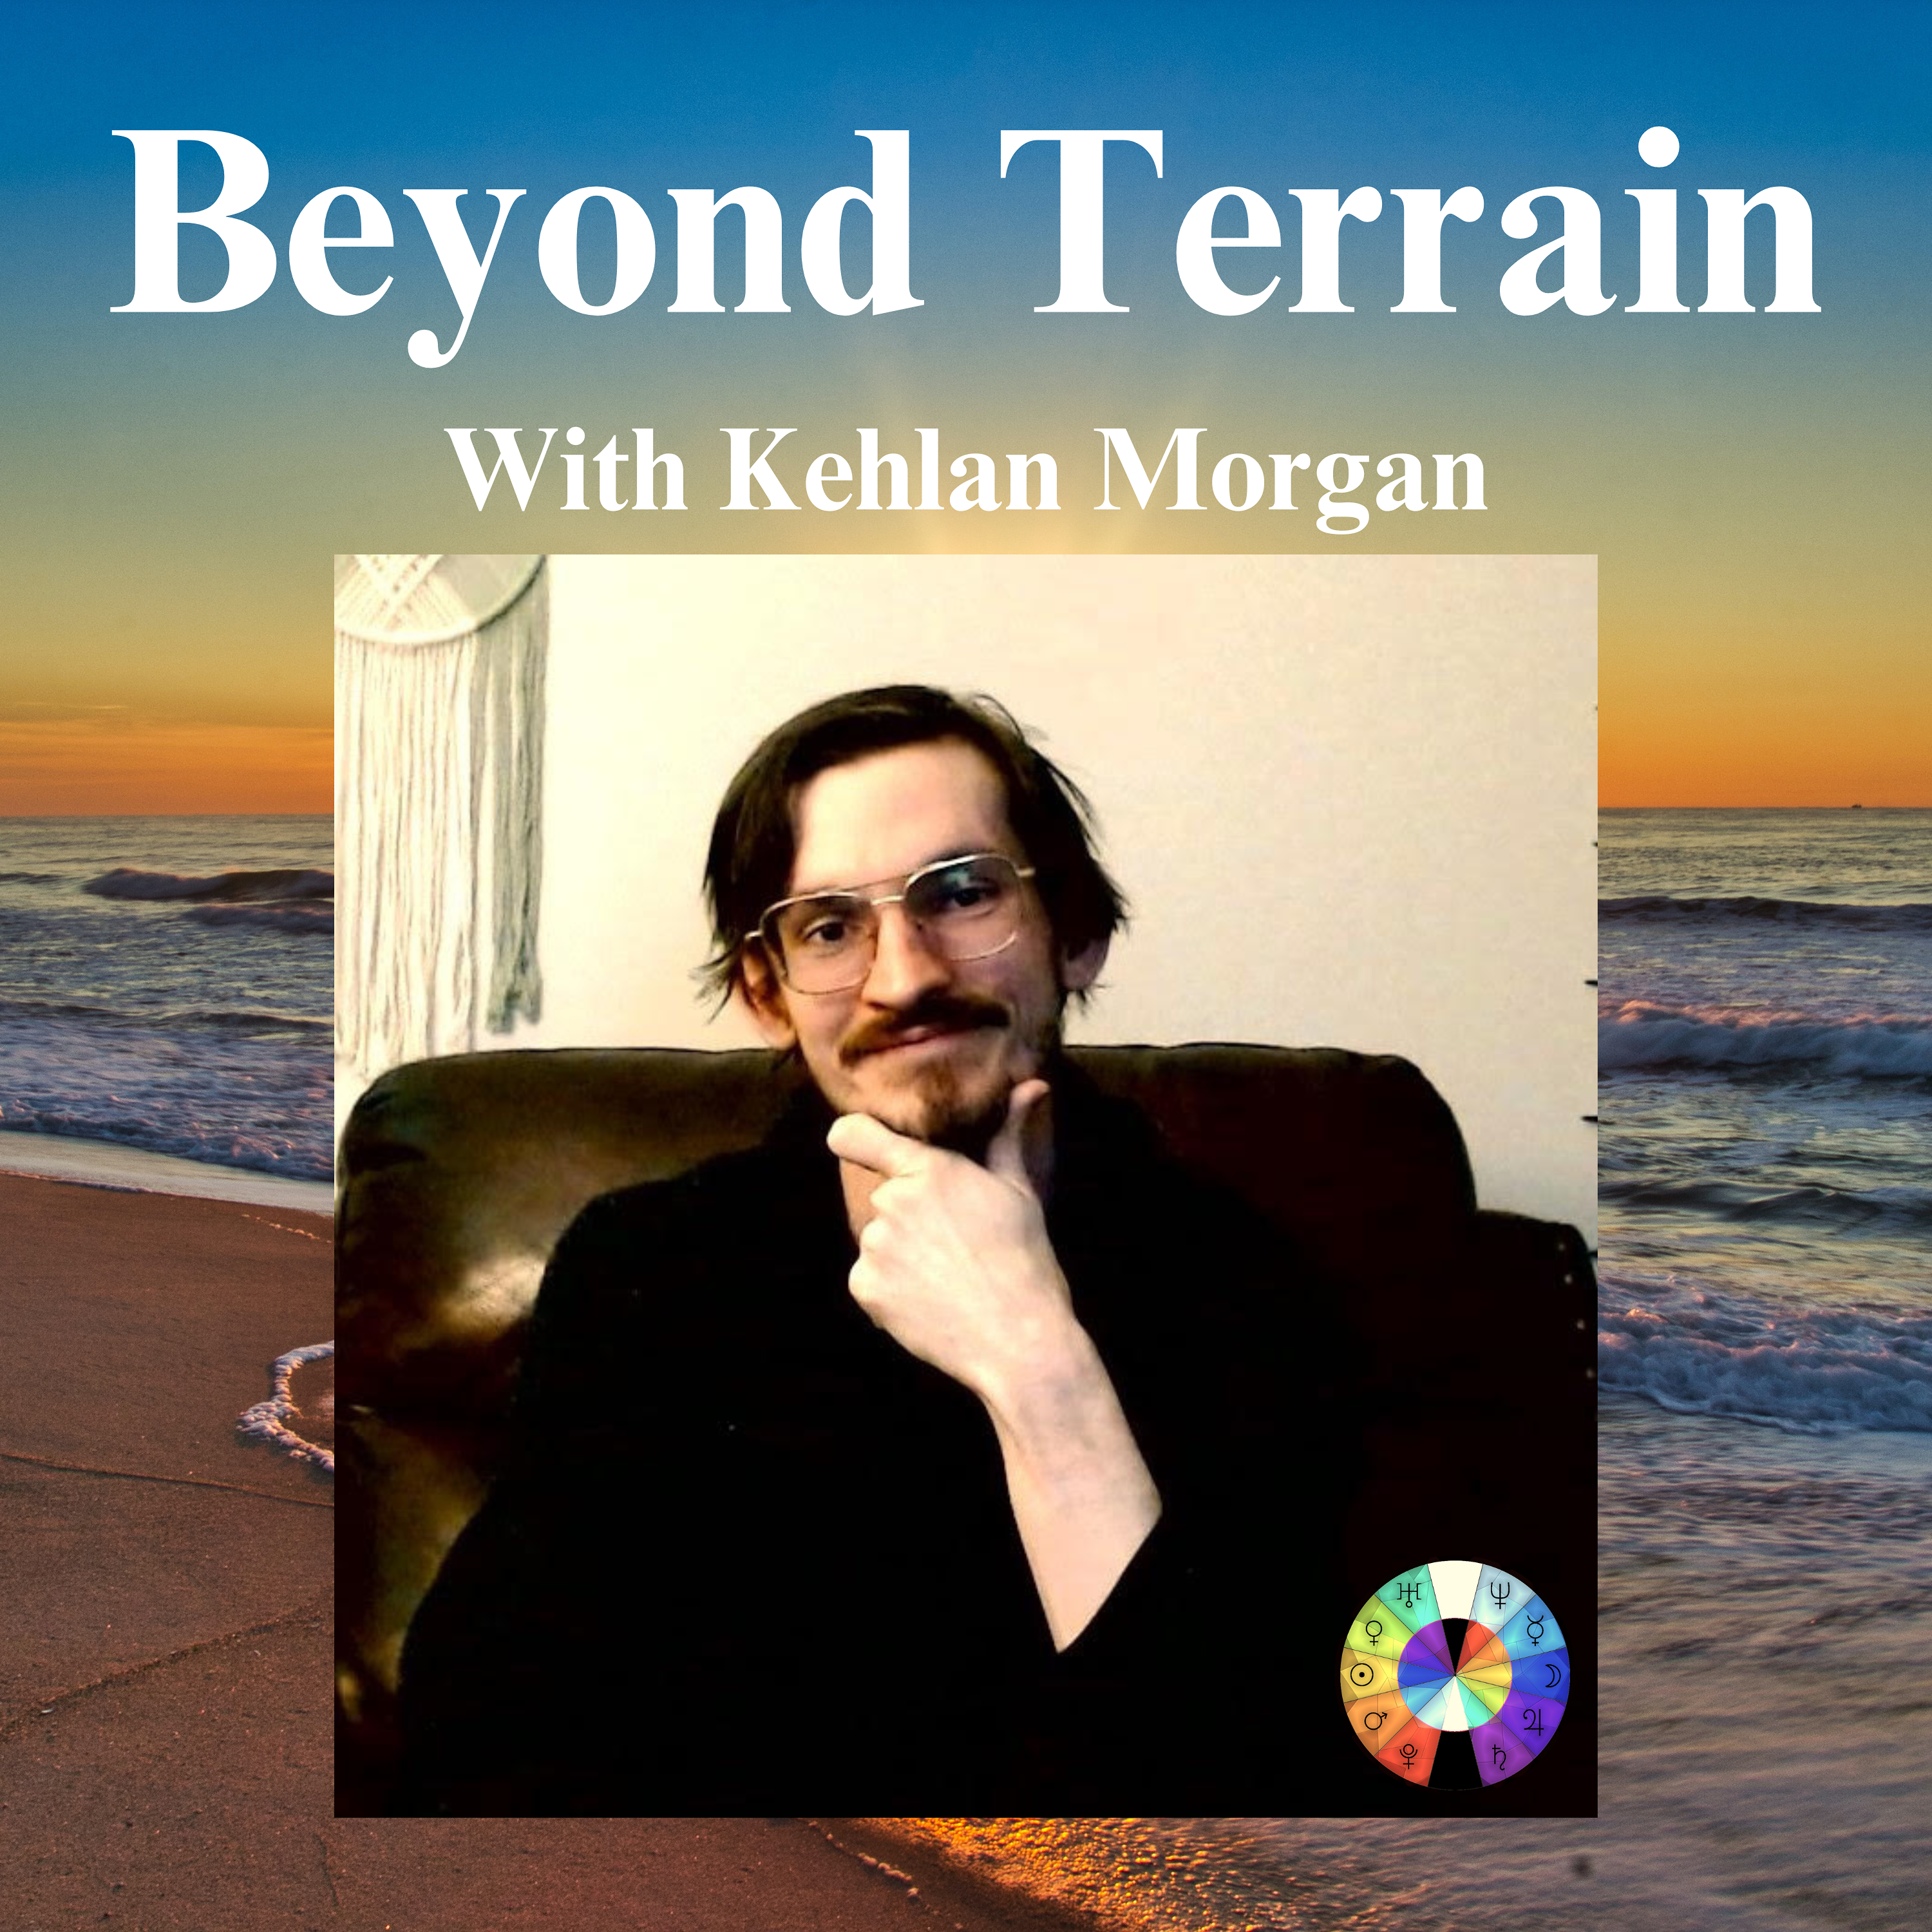 Kehlan Morgan on the Philosophy of Science, Scientific Reasoning, Morphic Resonance, and so much more!